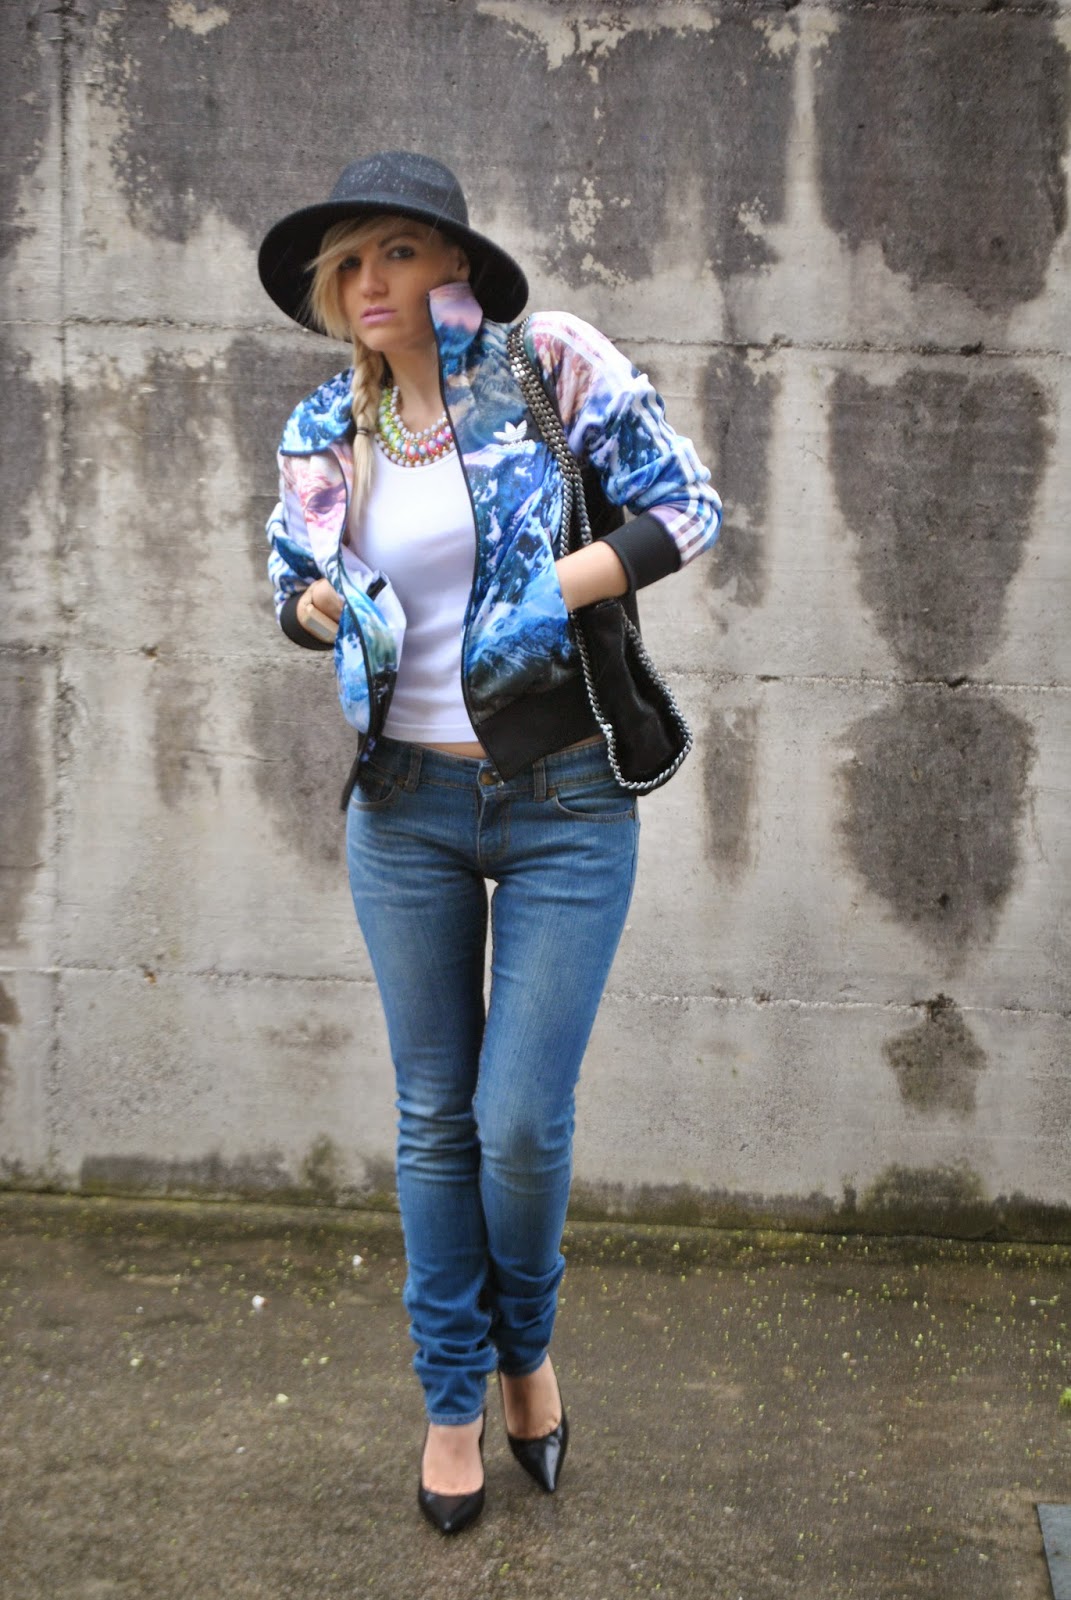 felpa adidas stampata outfit felpa adidas stampata con paesaggio felpa adidas outfit jeans e felpa outfit jeans e tacchi mariafelicia magno colorblock by felym mariafelicia magno fashion blogger outfit jeans e tacchi outfit aprile 2015 ragazze bionde outfit cappello fedora fedora hat adidas sweatshirt jeans and heels spring outfit outfit primaverili fashion blogger italiane fashion blog italiani blog di moda blogger di moda blondie blonde hair braid orologio in legno gufo italy falabella borsa nera outfit borsa nera outfit decollete nere 